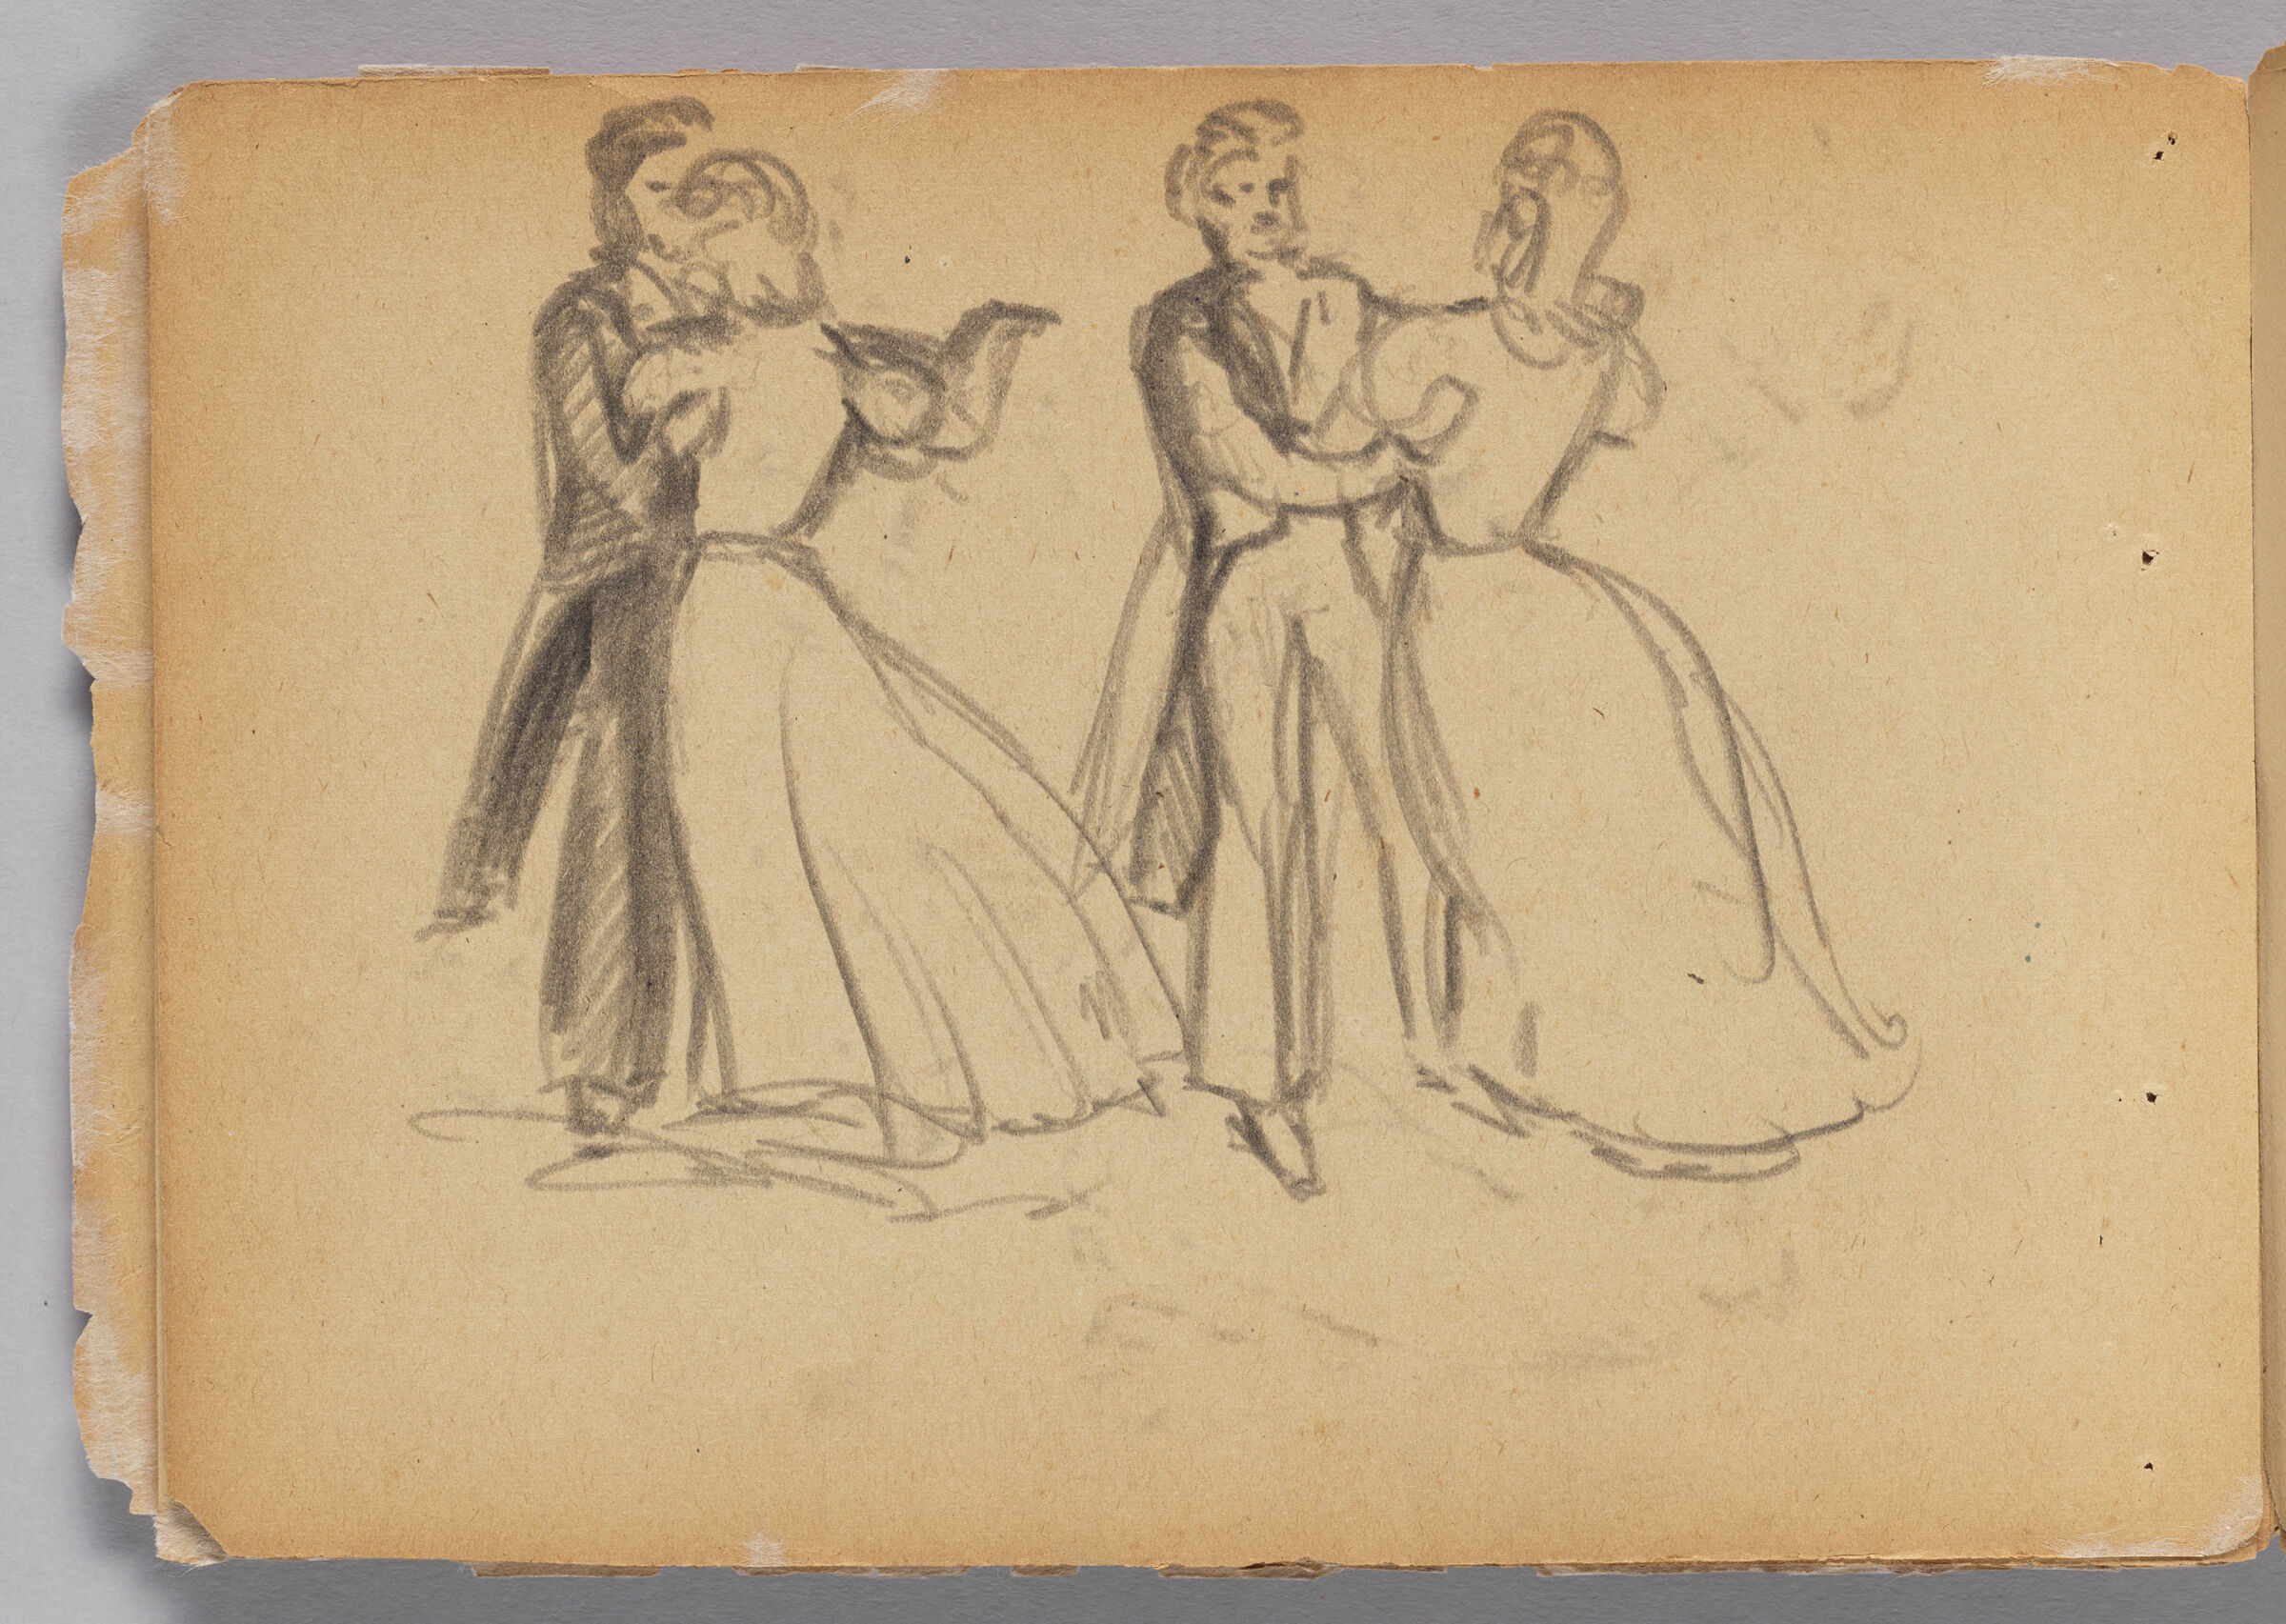 Untitled (Sketches Of Male And Female Couple Dancing, Left Page); Untitled (Landscape With Village, Right Page)